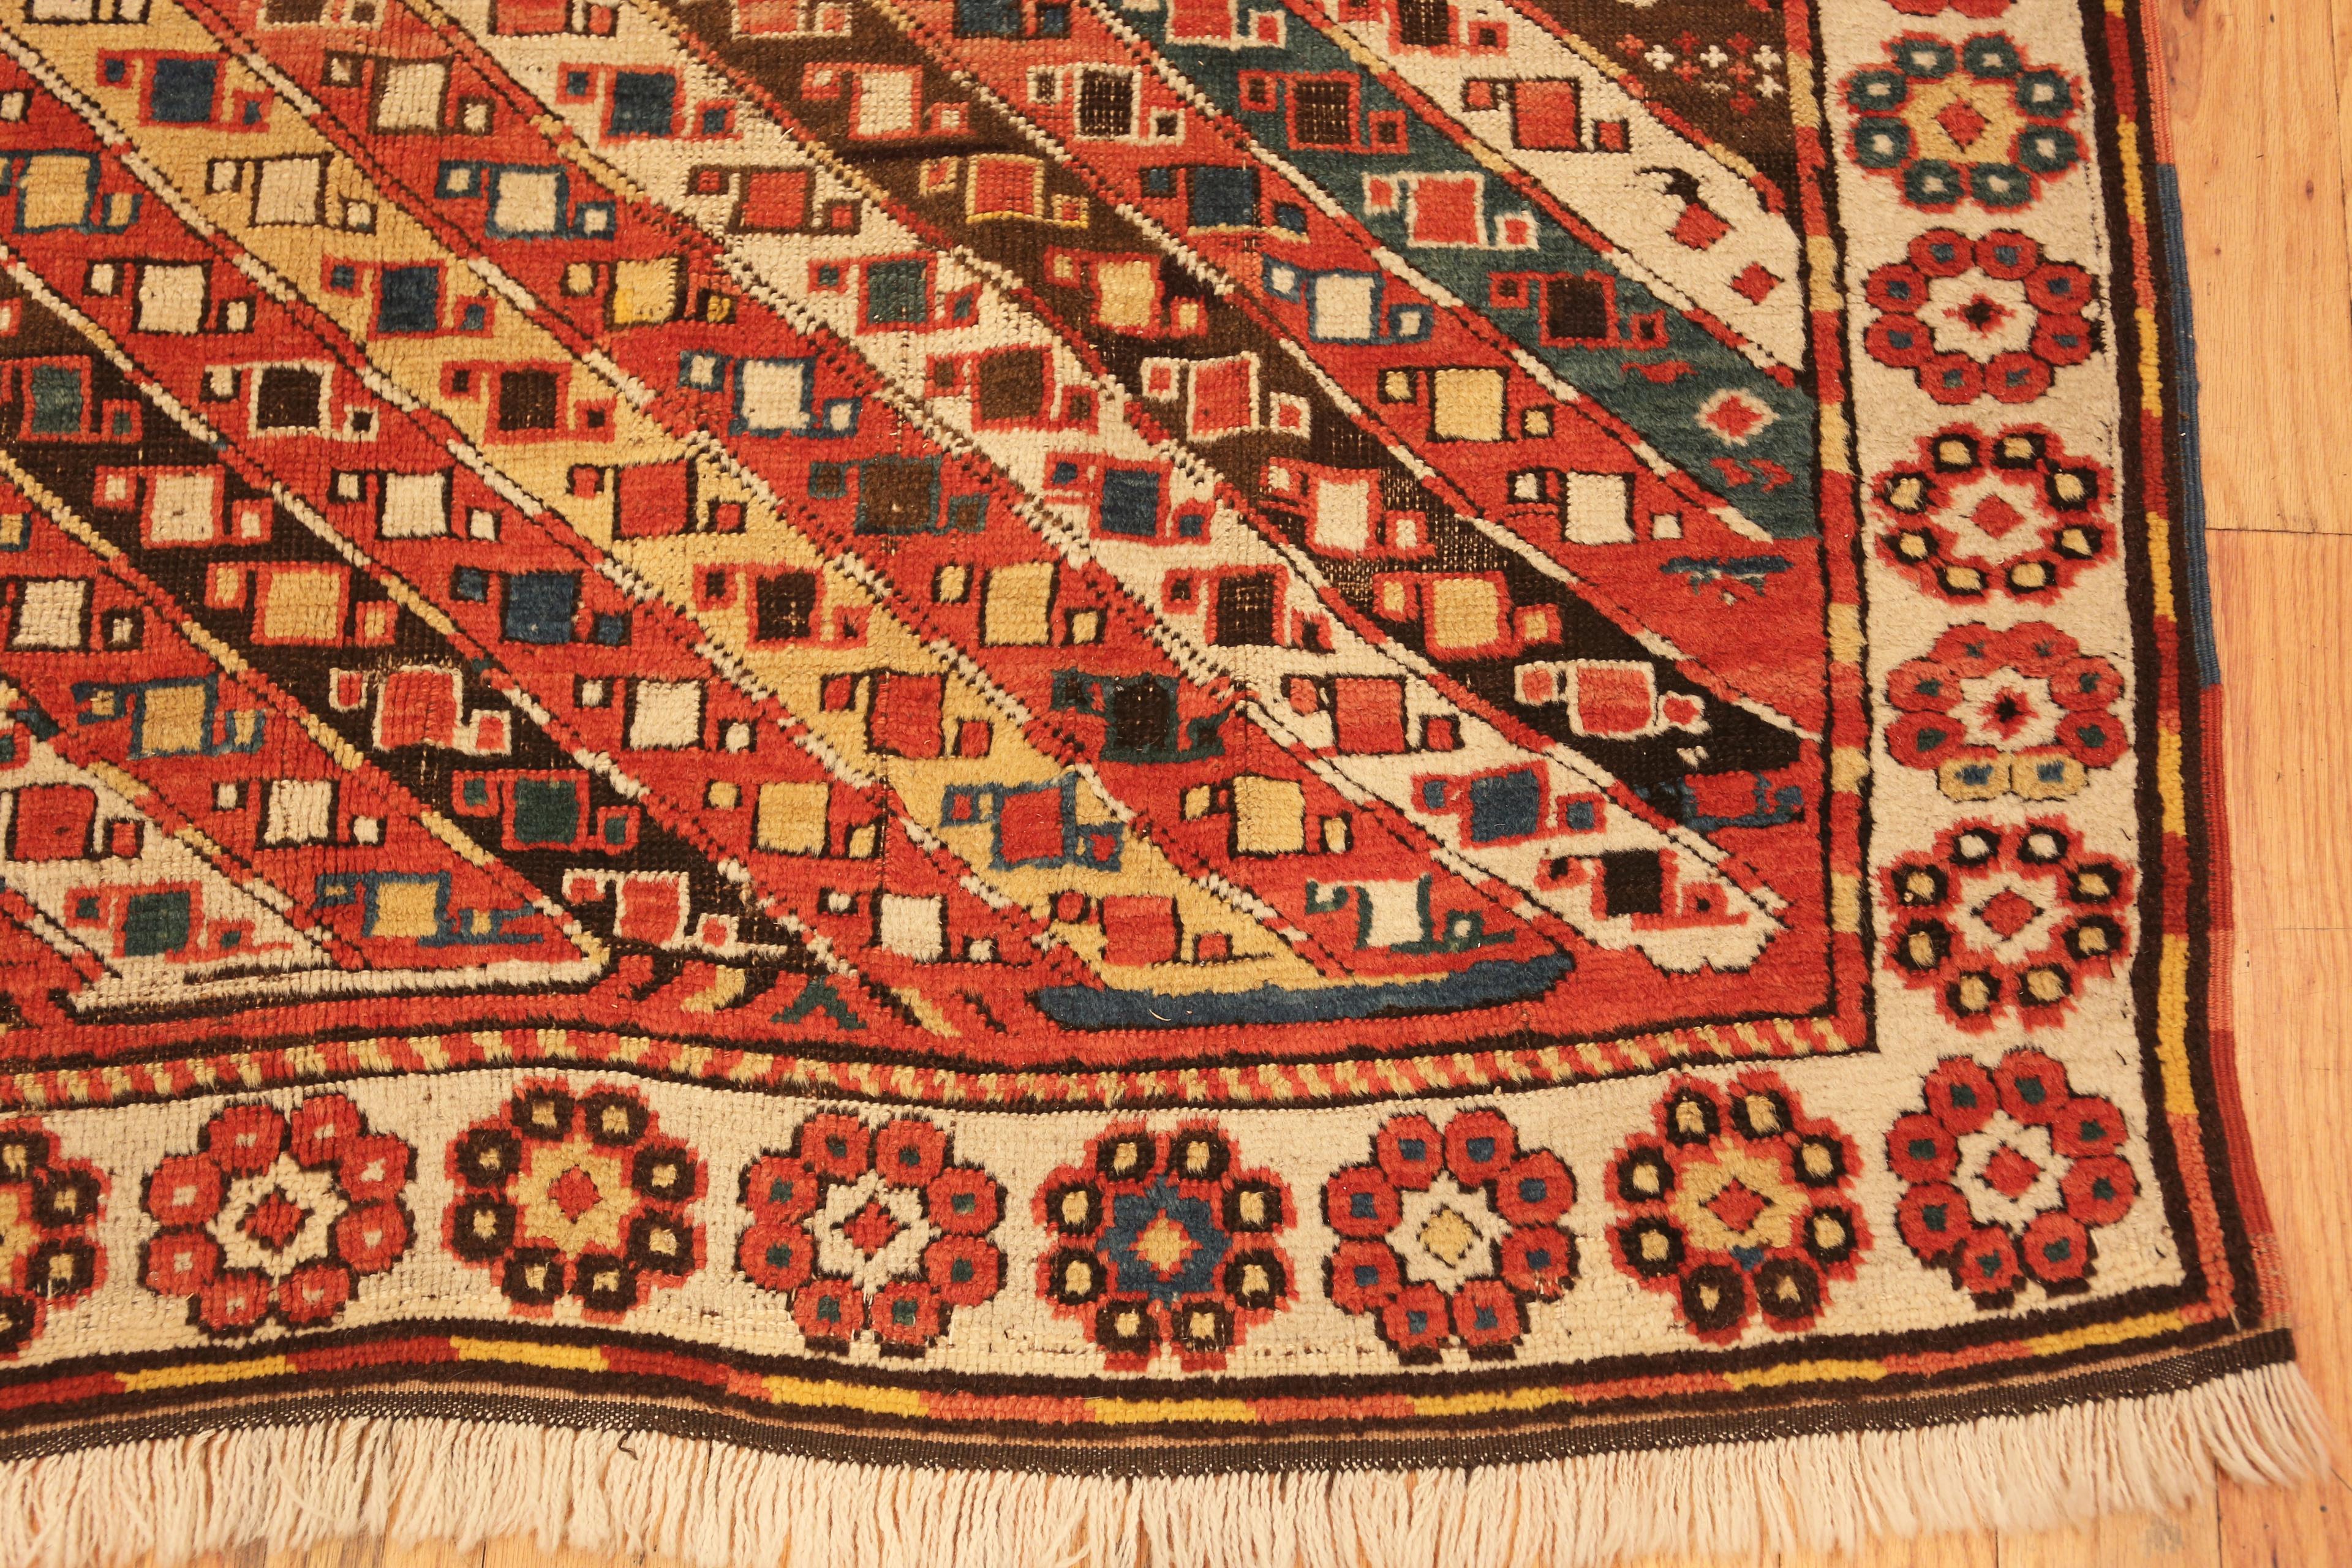 Hand-Knotted Antique Caucasian Kazak Rug. 5 ft 3 in x 8 ft 5 in